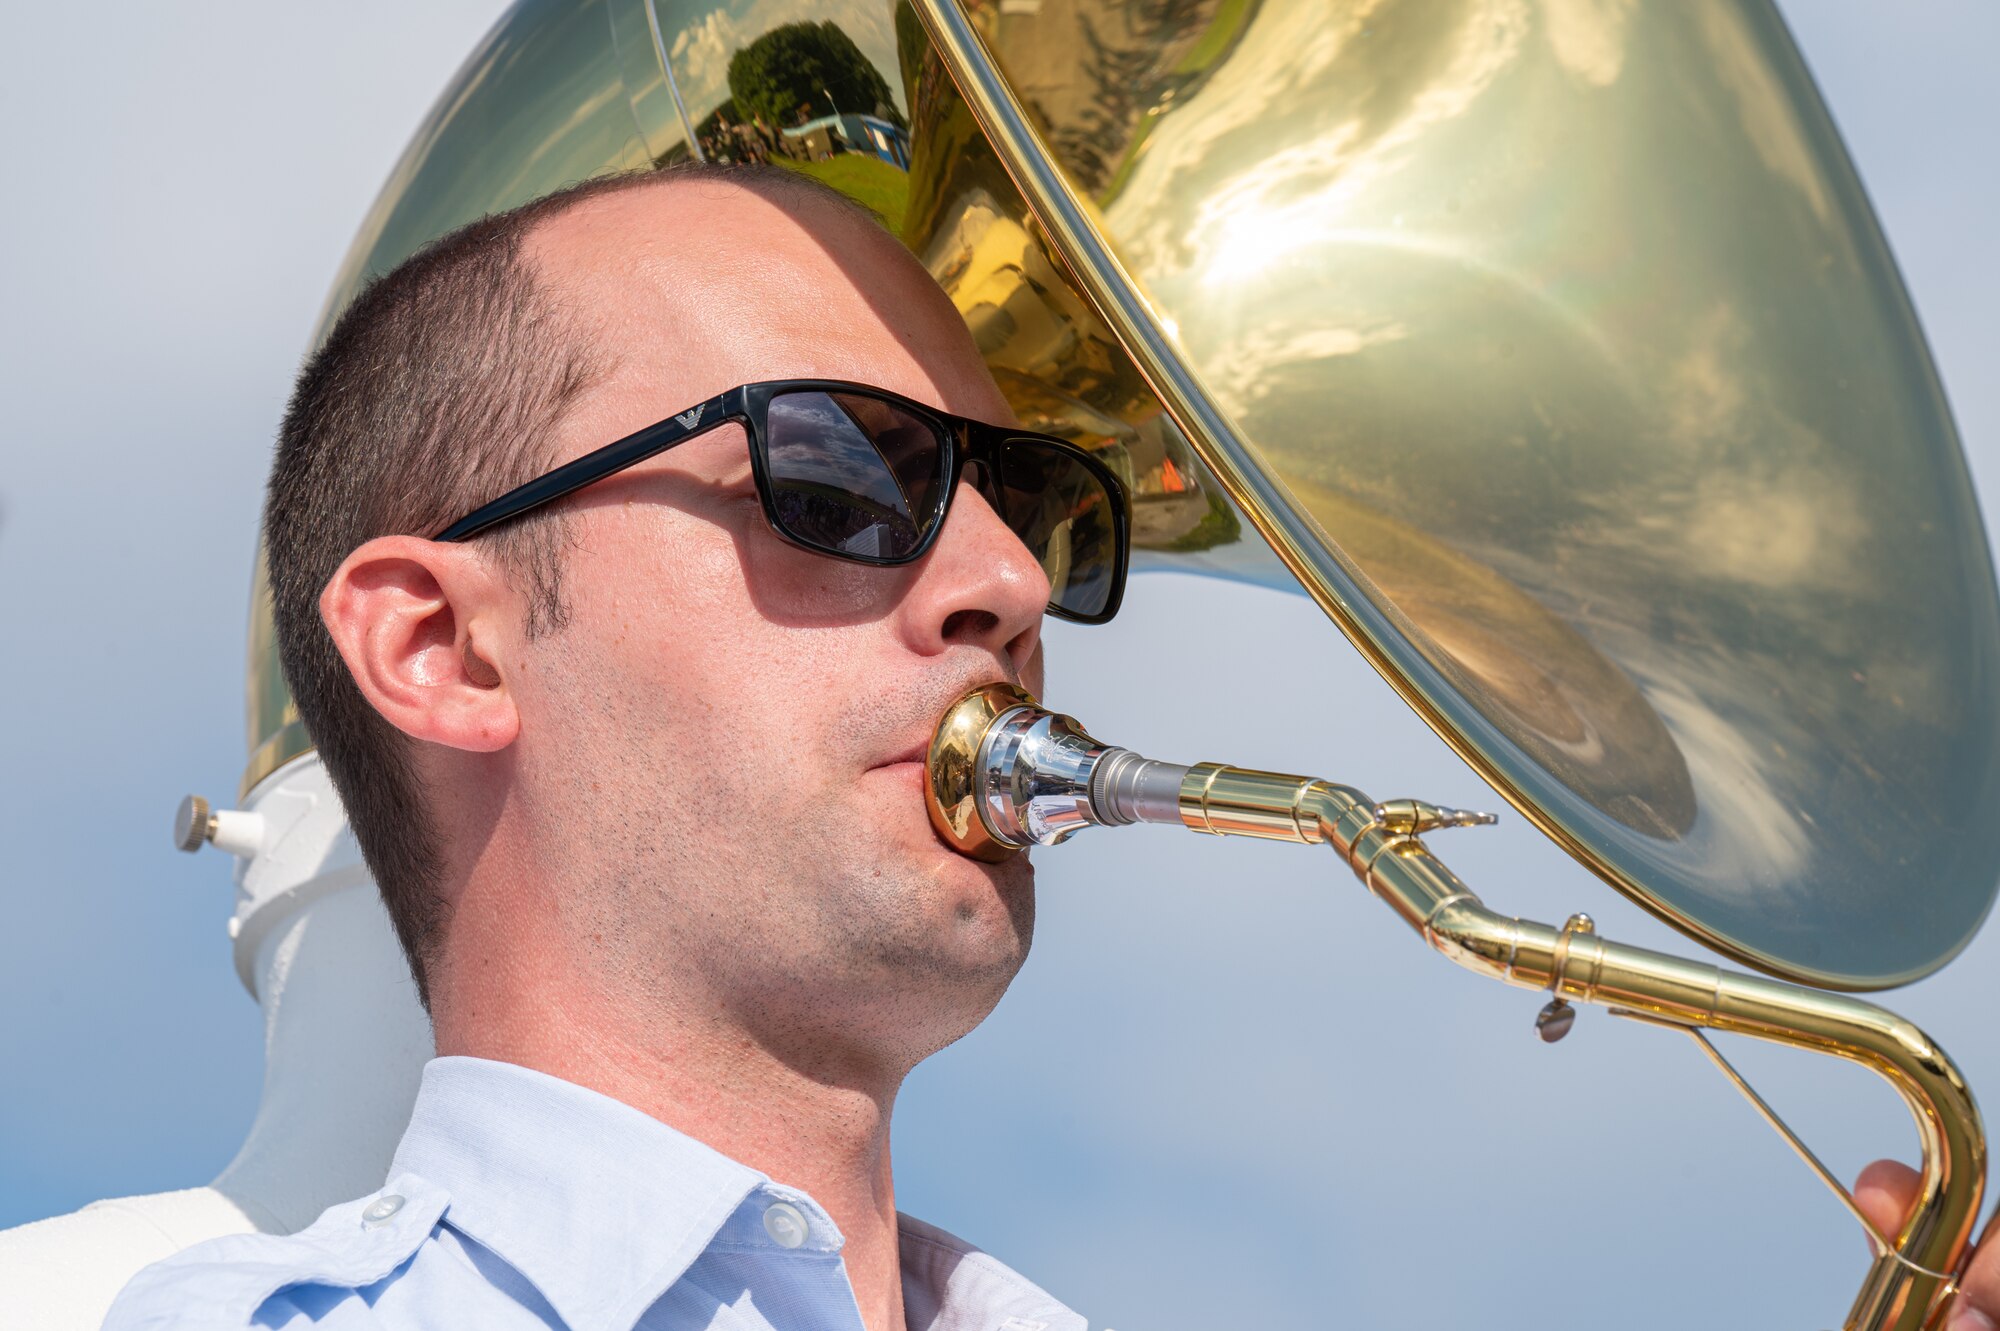 U.S. Air Force Staff Sgt. Will Dellinger, U.S. Air Forces in Europe Ceremonial Band tubist, performs during the NATO Days event at Leoš Janáček Airport in Ostrava, Czech Republic, Sept. 17, 2023.